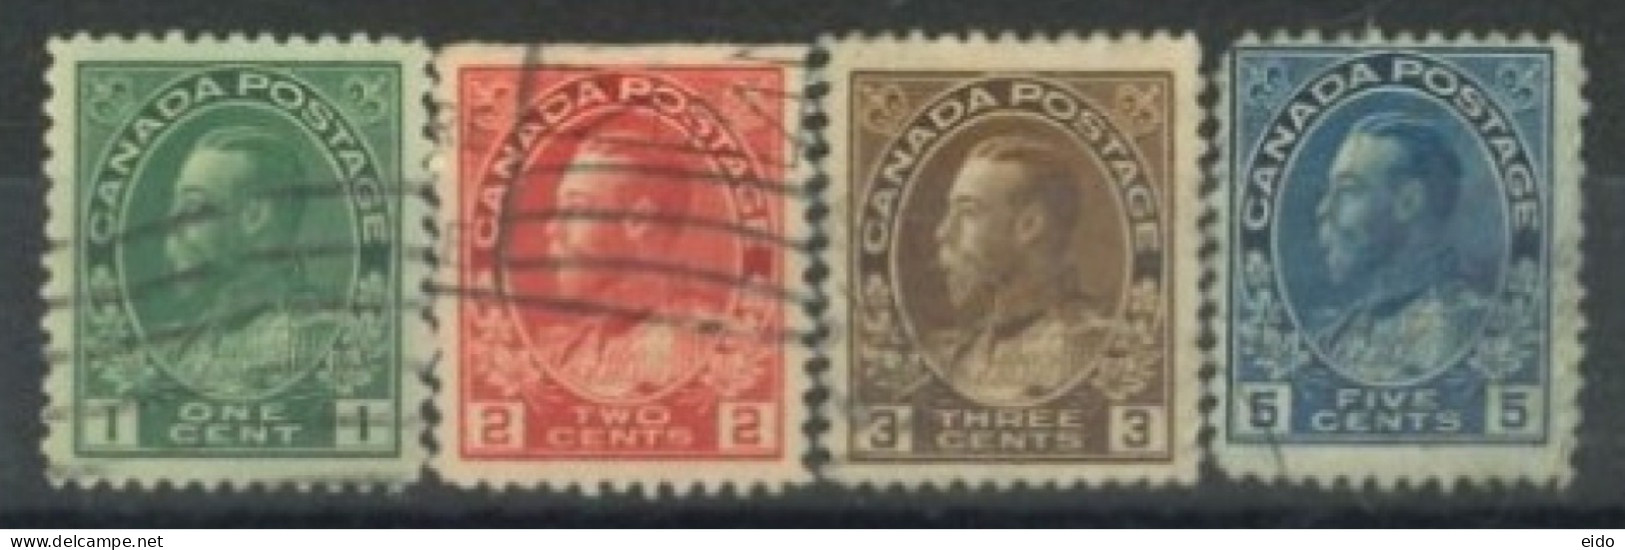 CANADA - 1912, KING GEORGE V STAMPS SET OF 4, USED. - Usati